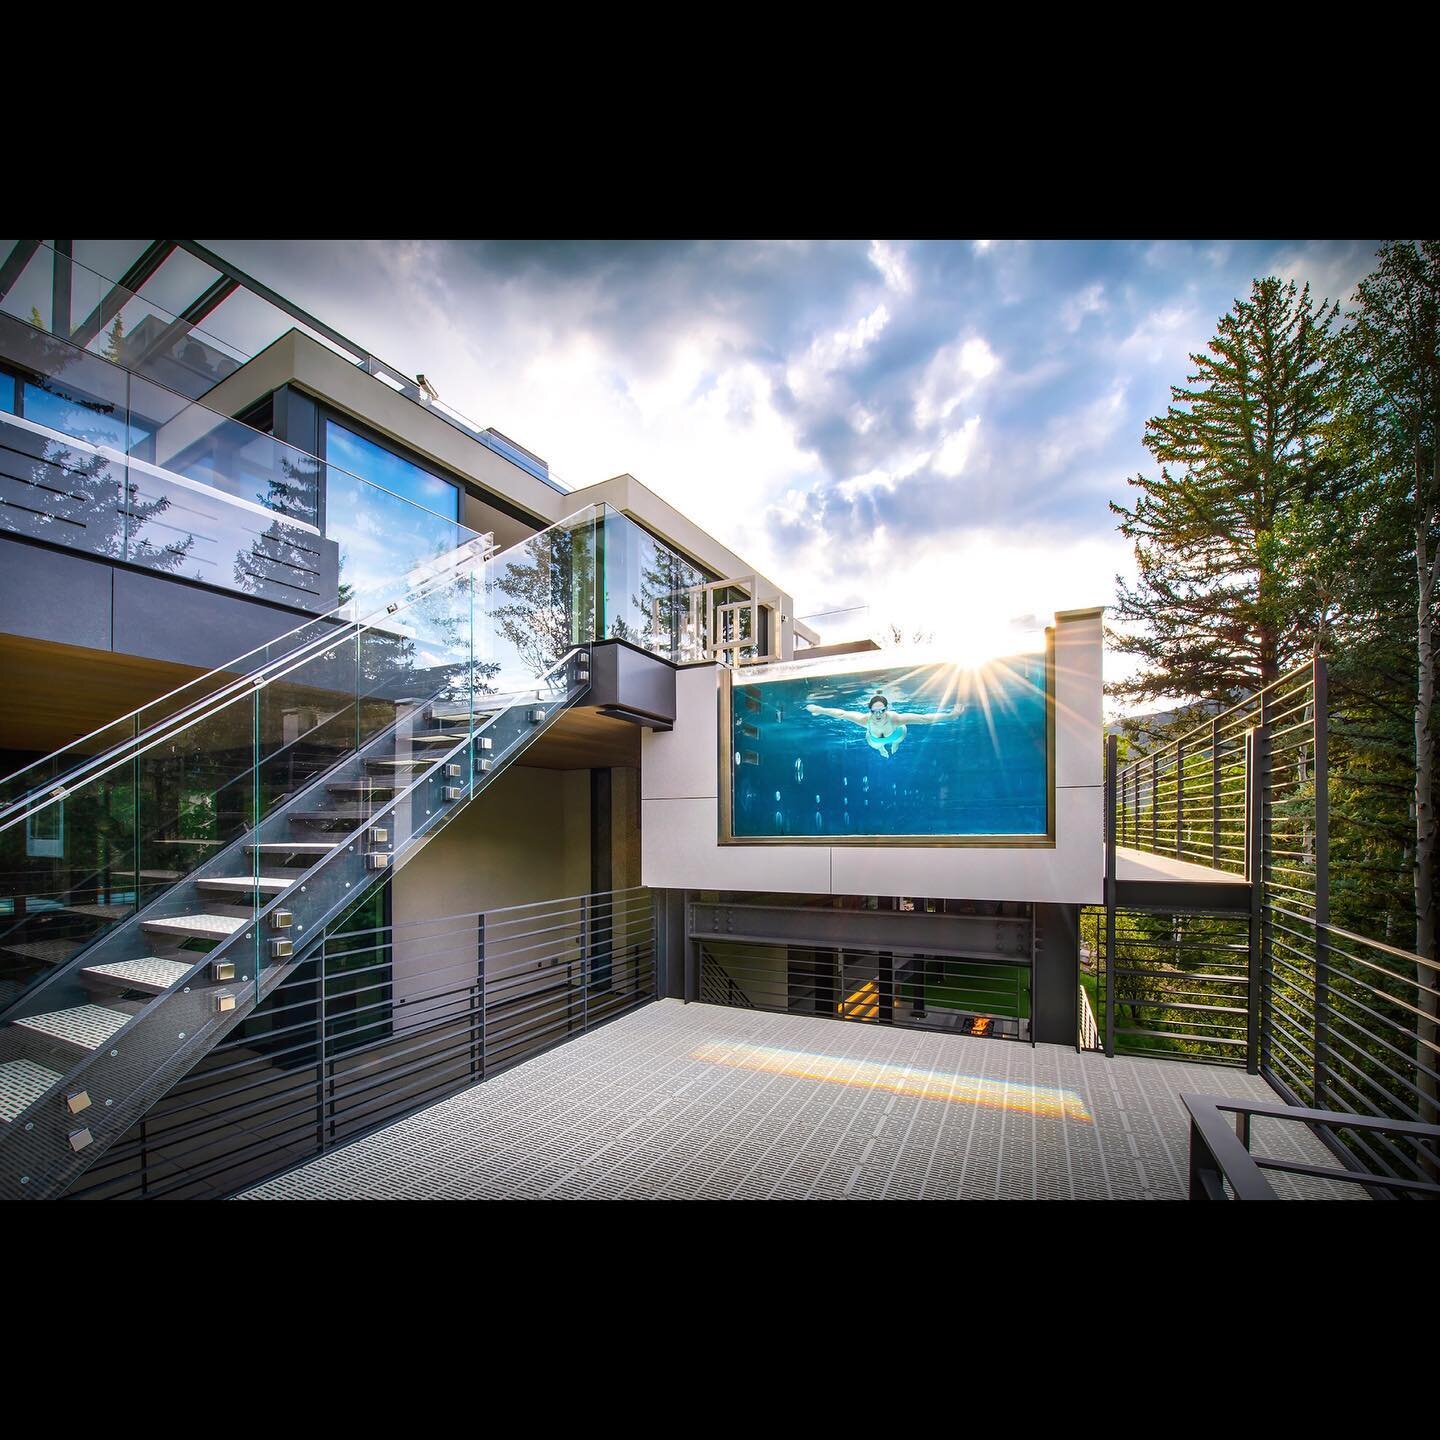 Modern Pool Vibes.....
This was one of the most complicated residential pool designs I&rsquo;ve ever photographed. I actually got to watch and film the install of this masterpiece, and to say there were a lot of moving parts would be an understatemen